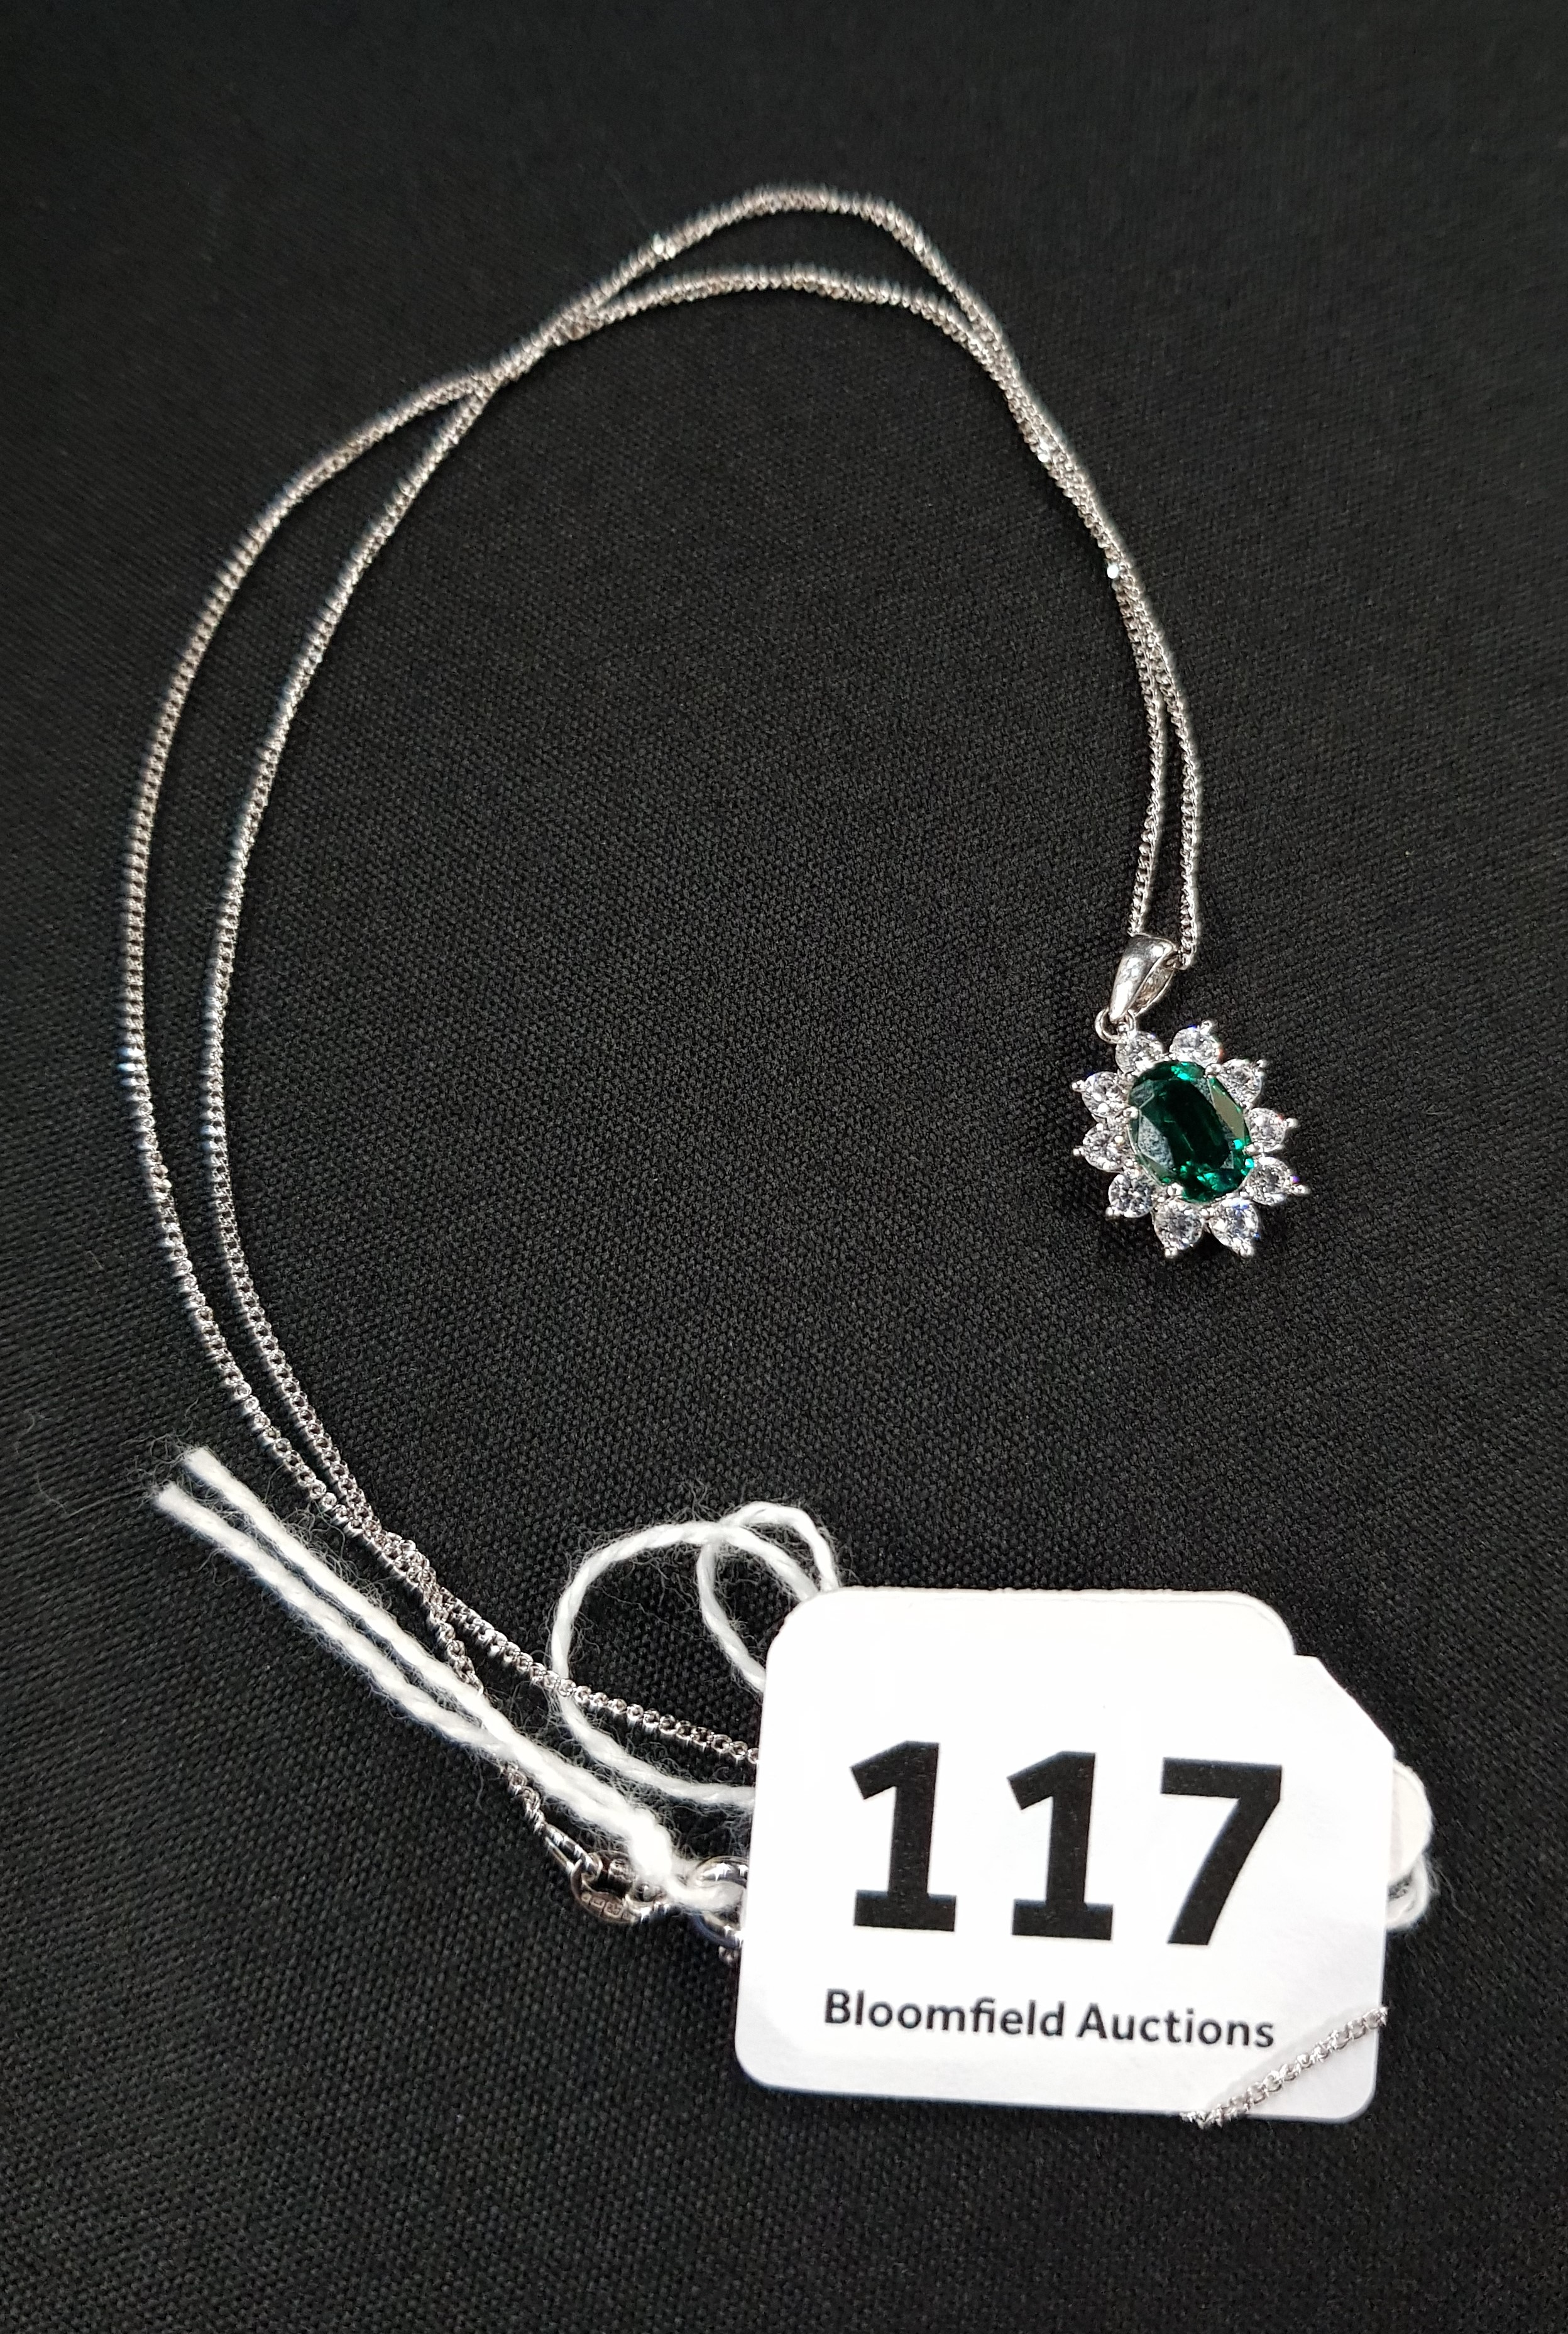 EMERALD AND DIAMOND PENDANT SET IN 9 CT WITH 9 CARAT CHAIN